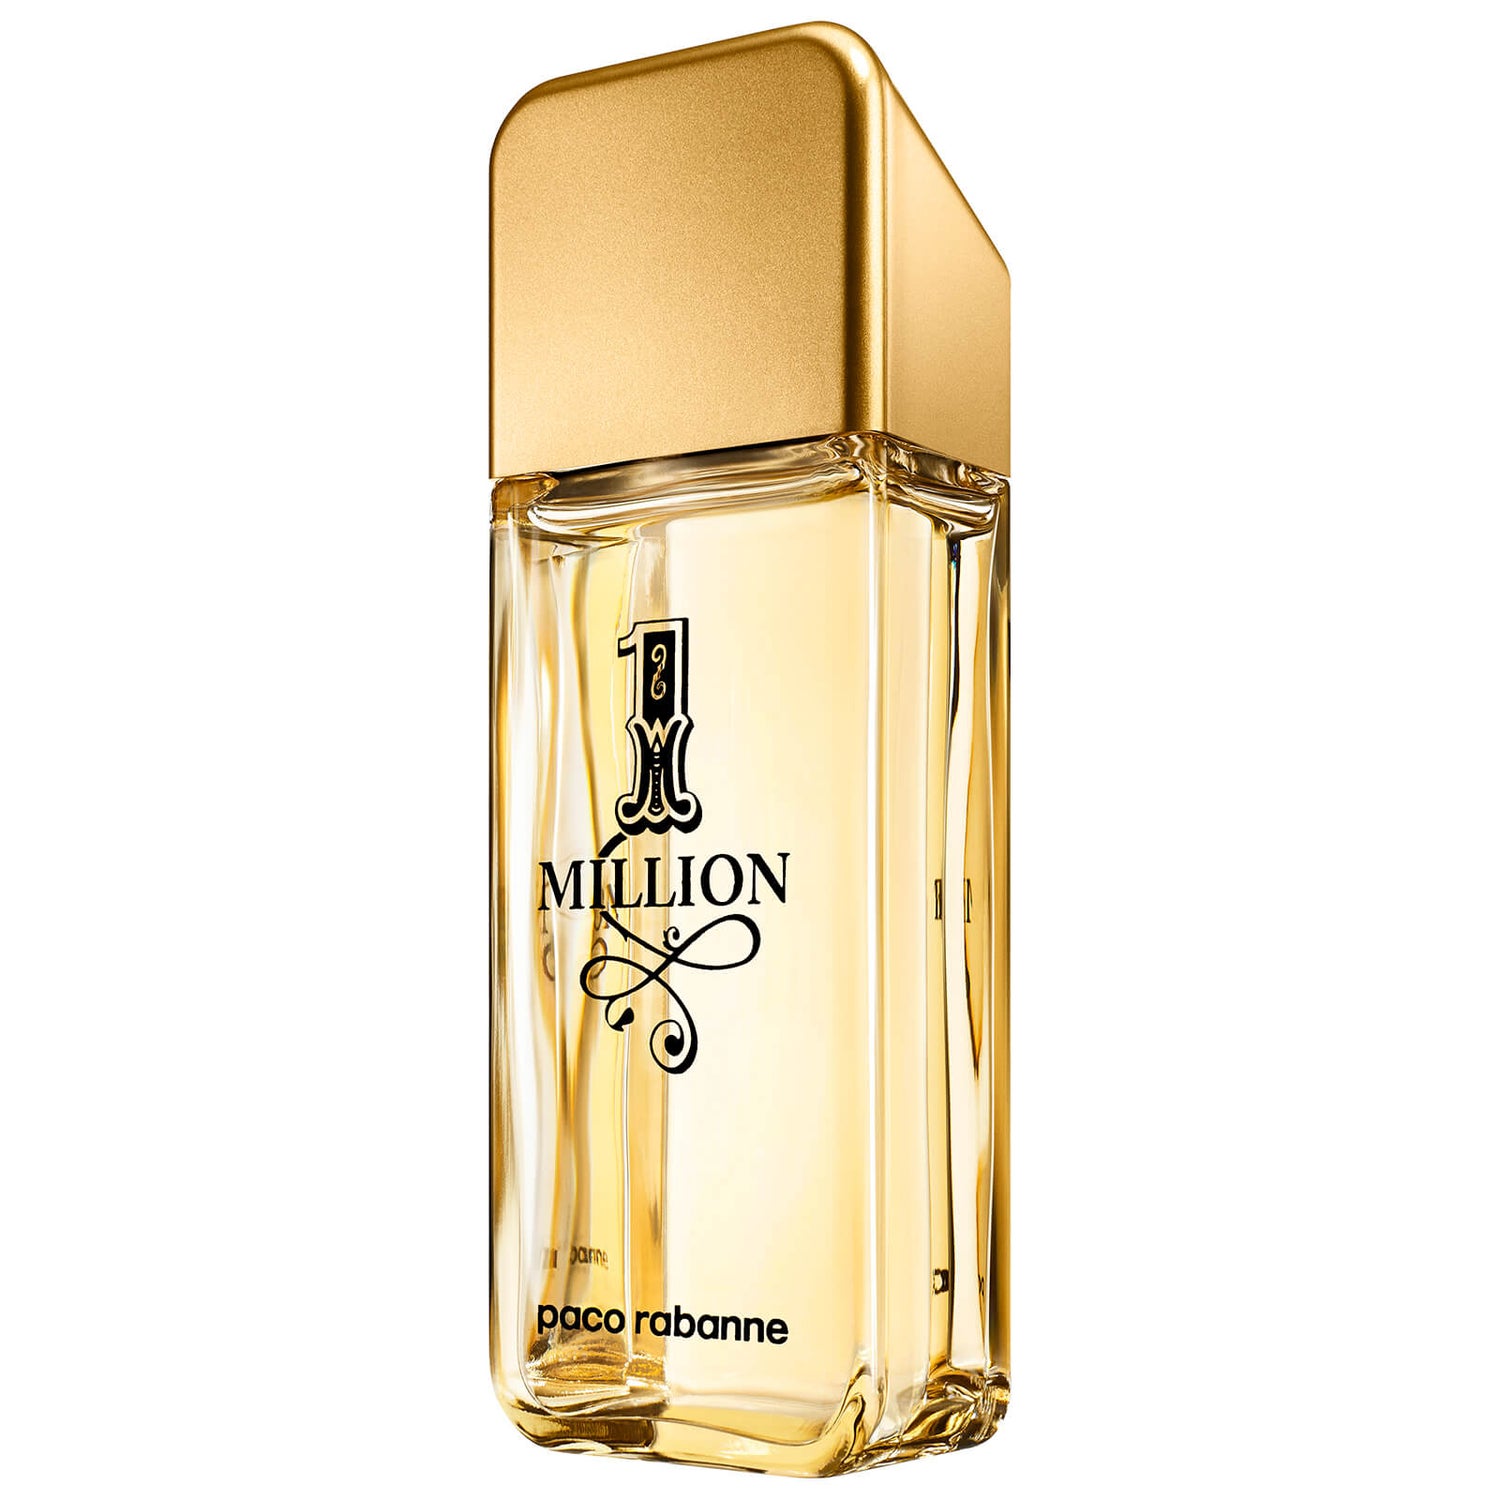 Paco Rabanne 1 Million After Shave Lotion (100ml)